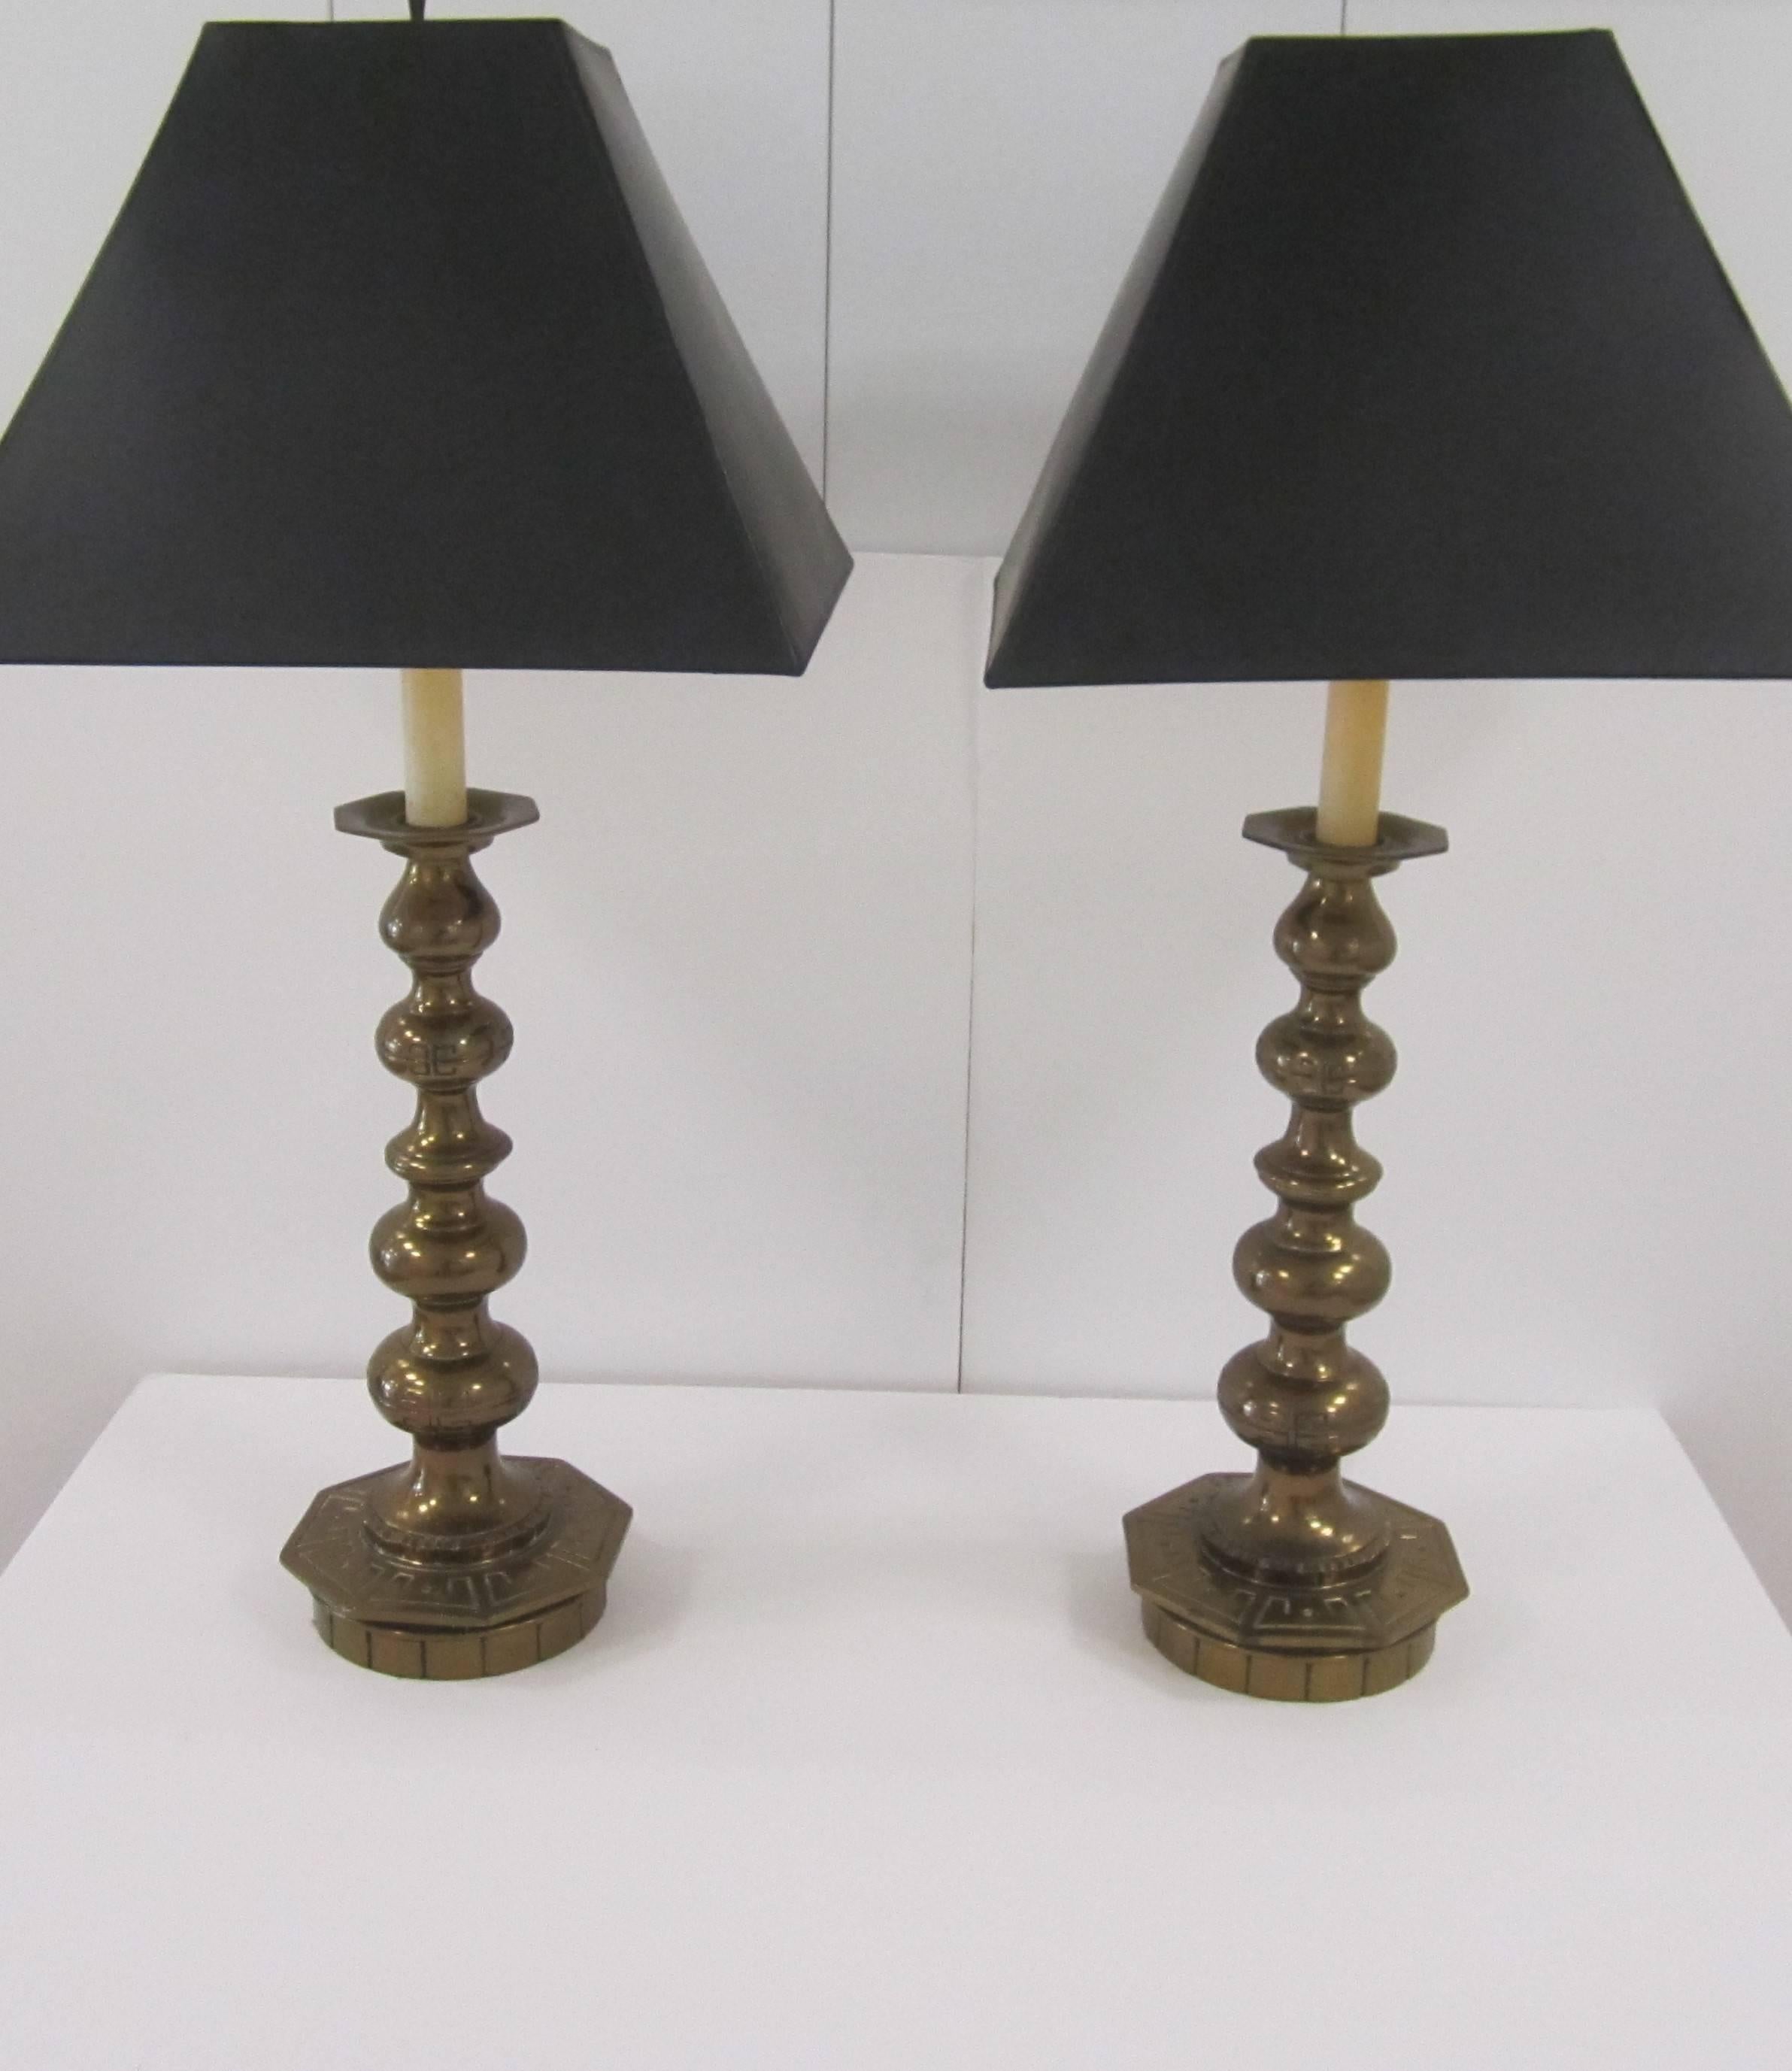 A beautiful and striking pair of tall vintage gold or brass colored table lamps with octagonal base and embossed Greek key design, circa 1960s-1970s. Measures 24 inches H to top of finial. Pair available here online. By request, pair can be made